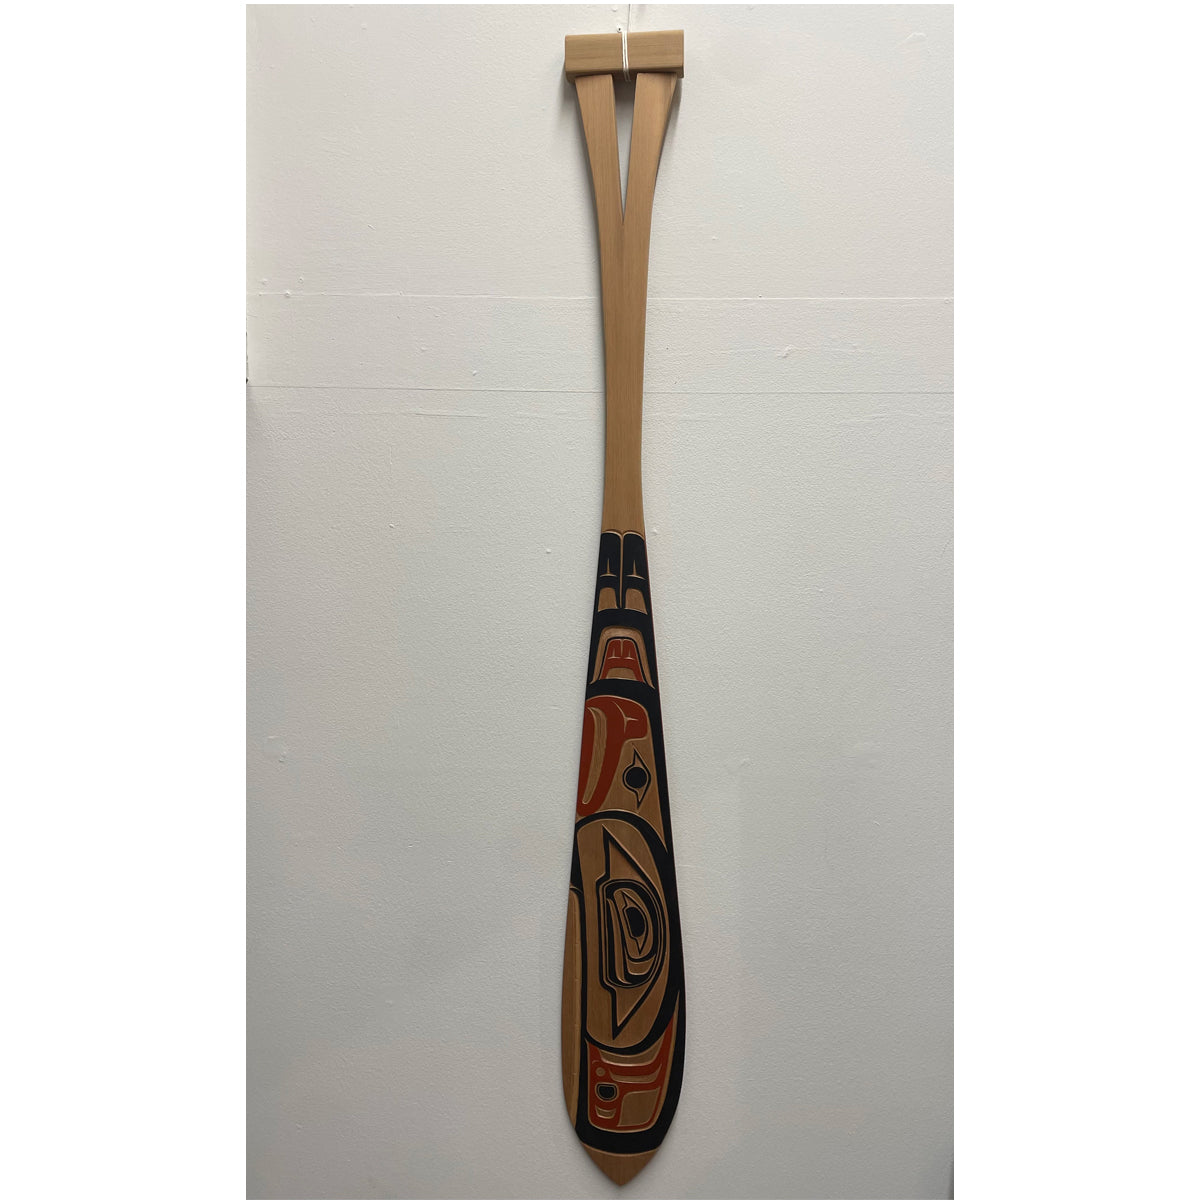 Victor West Paddle Orca/Raven/Eagle